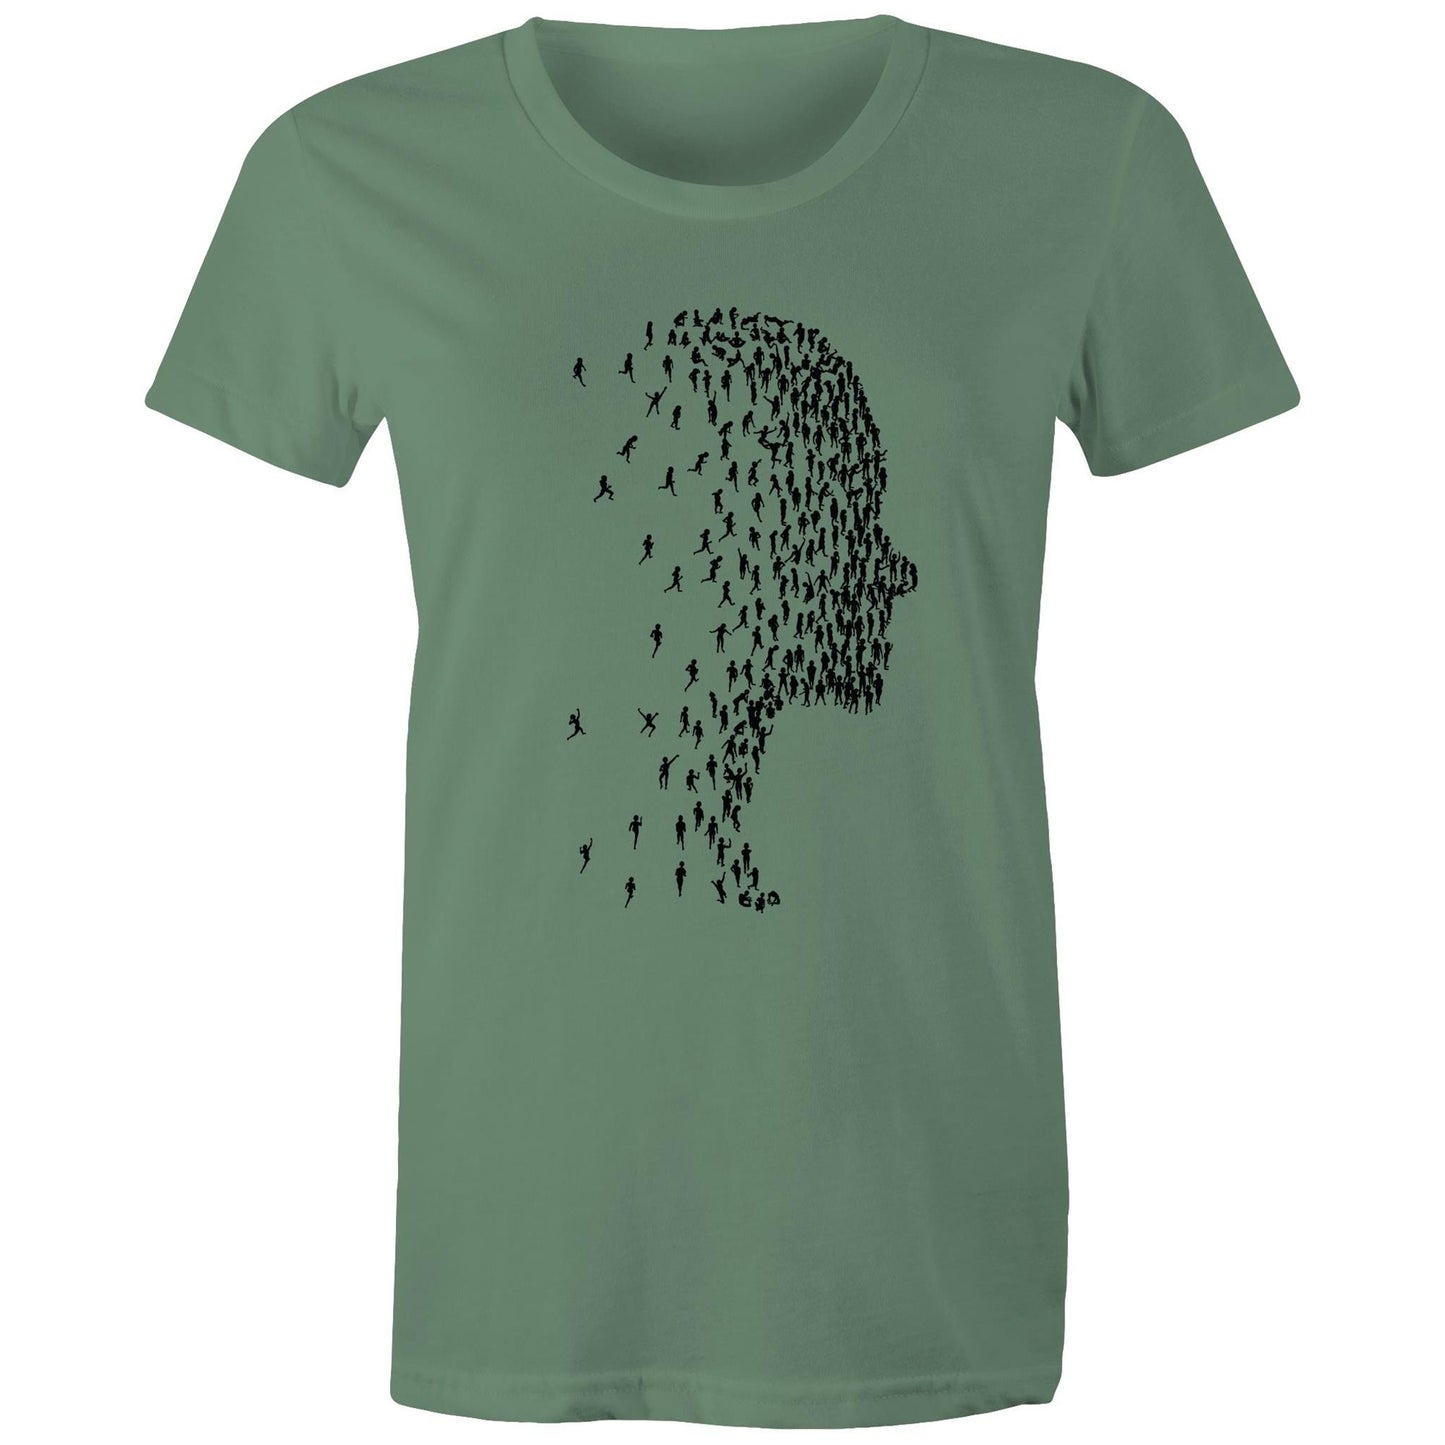 Occupy Collective Conscience - Women's T-Shirt